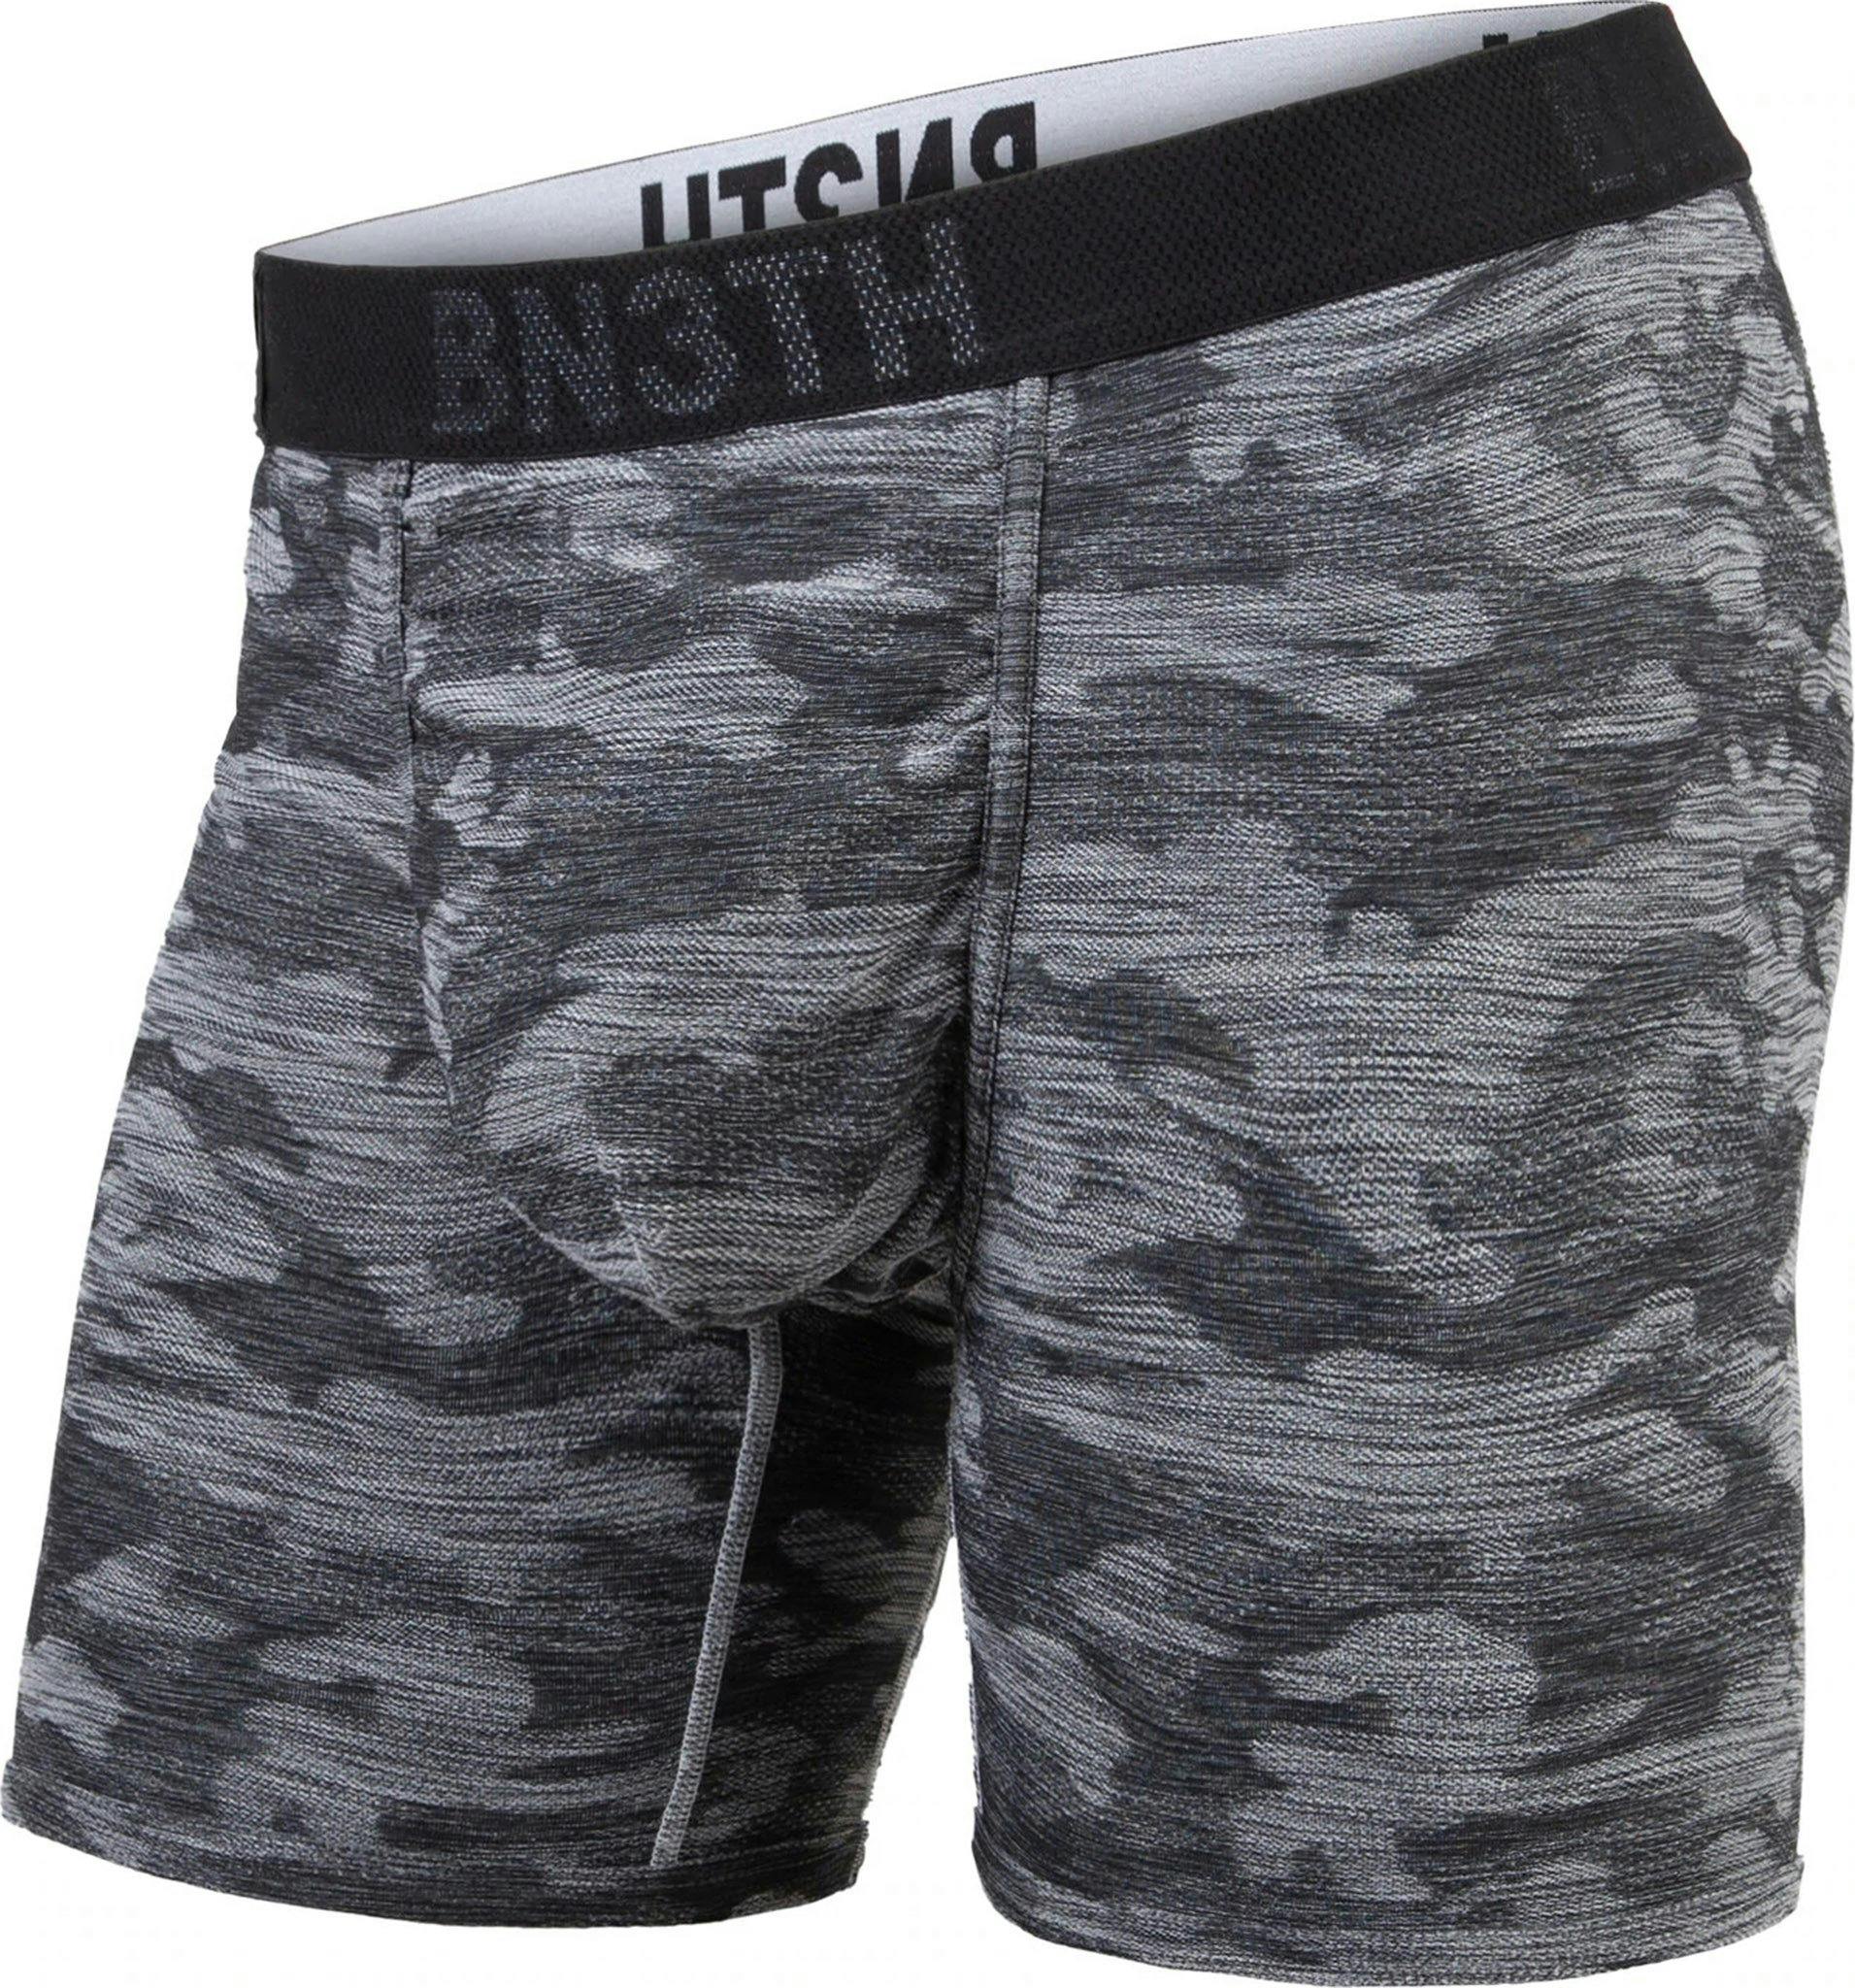 Product image for Hero Knit Boxer Brief - Men's